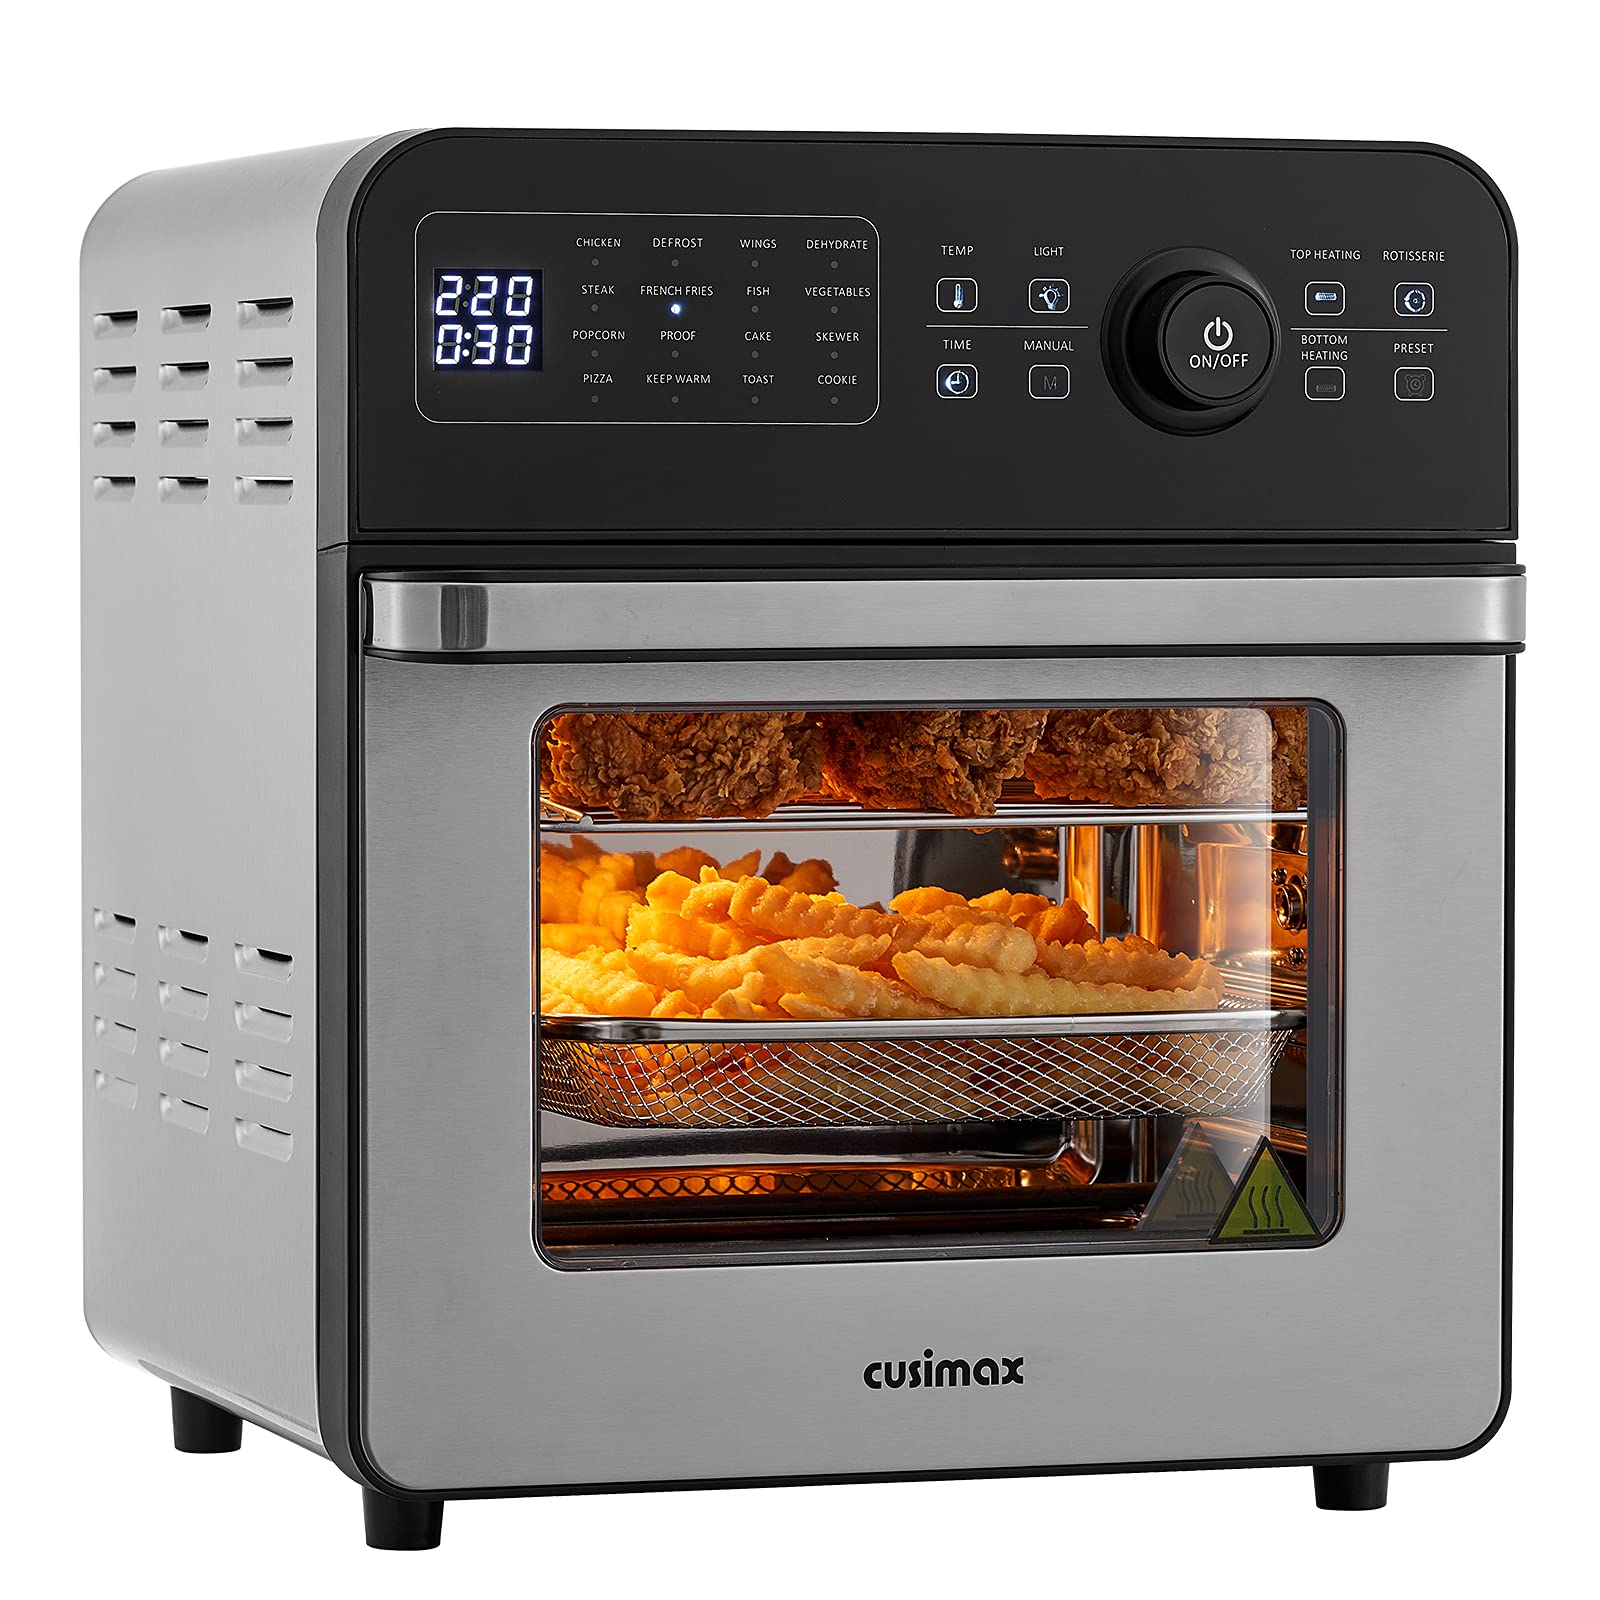 Cusimax 14.5L 16-in-1 Home Countertop Convection Oven (1700W)